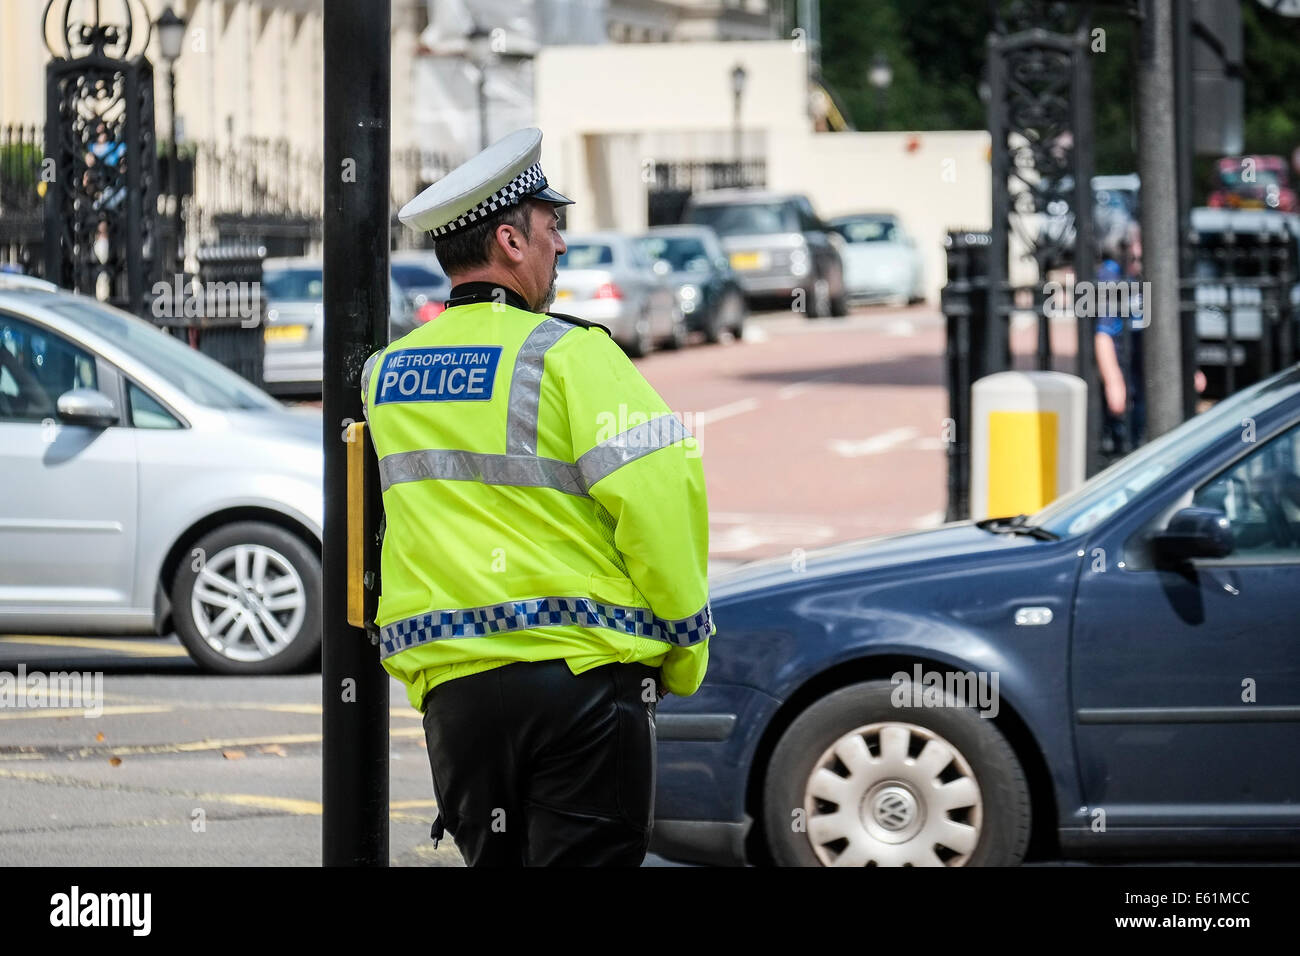 A Metropolitan police officer watching traffic at a junction in London in the UK. Stock Photo